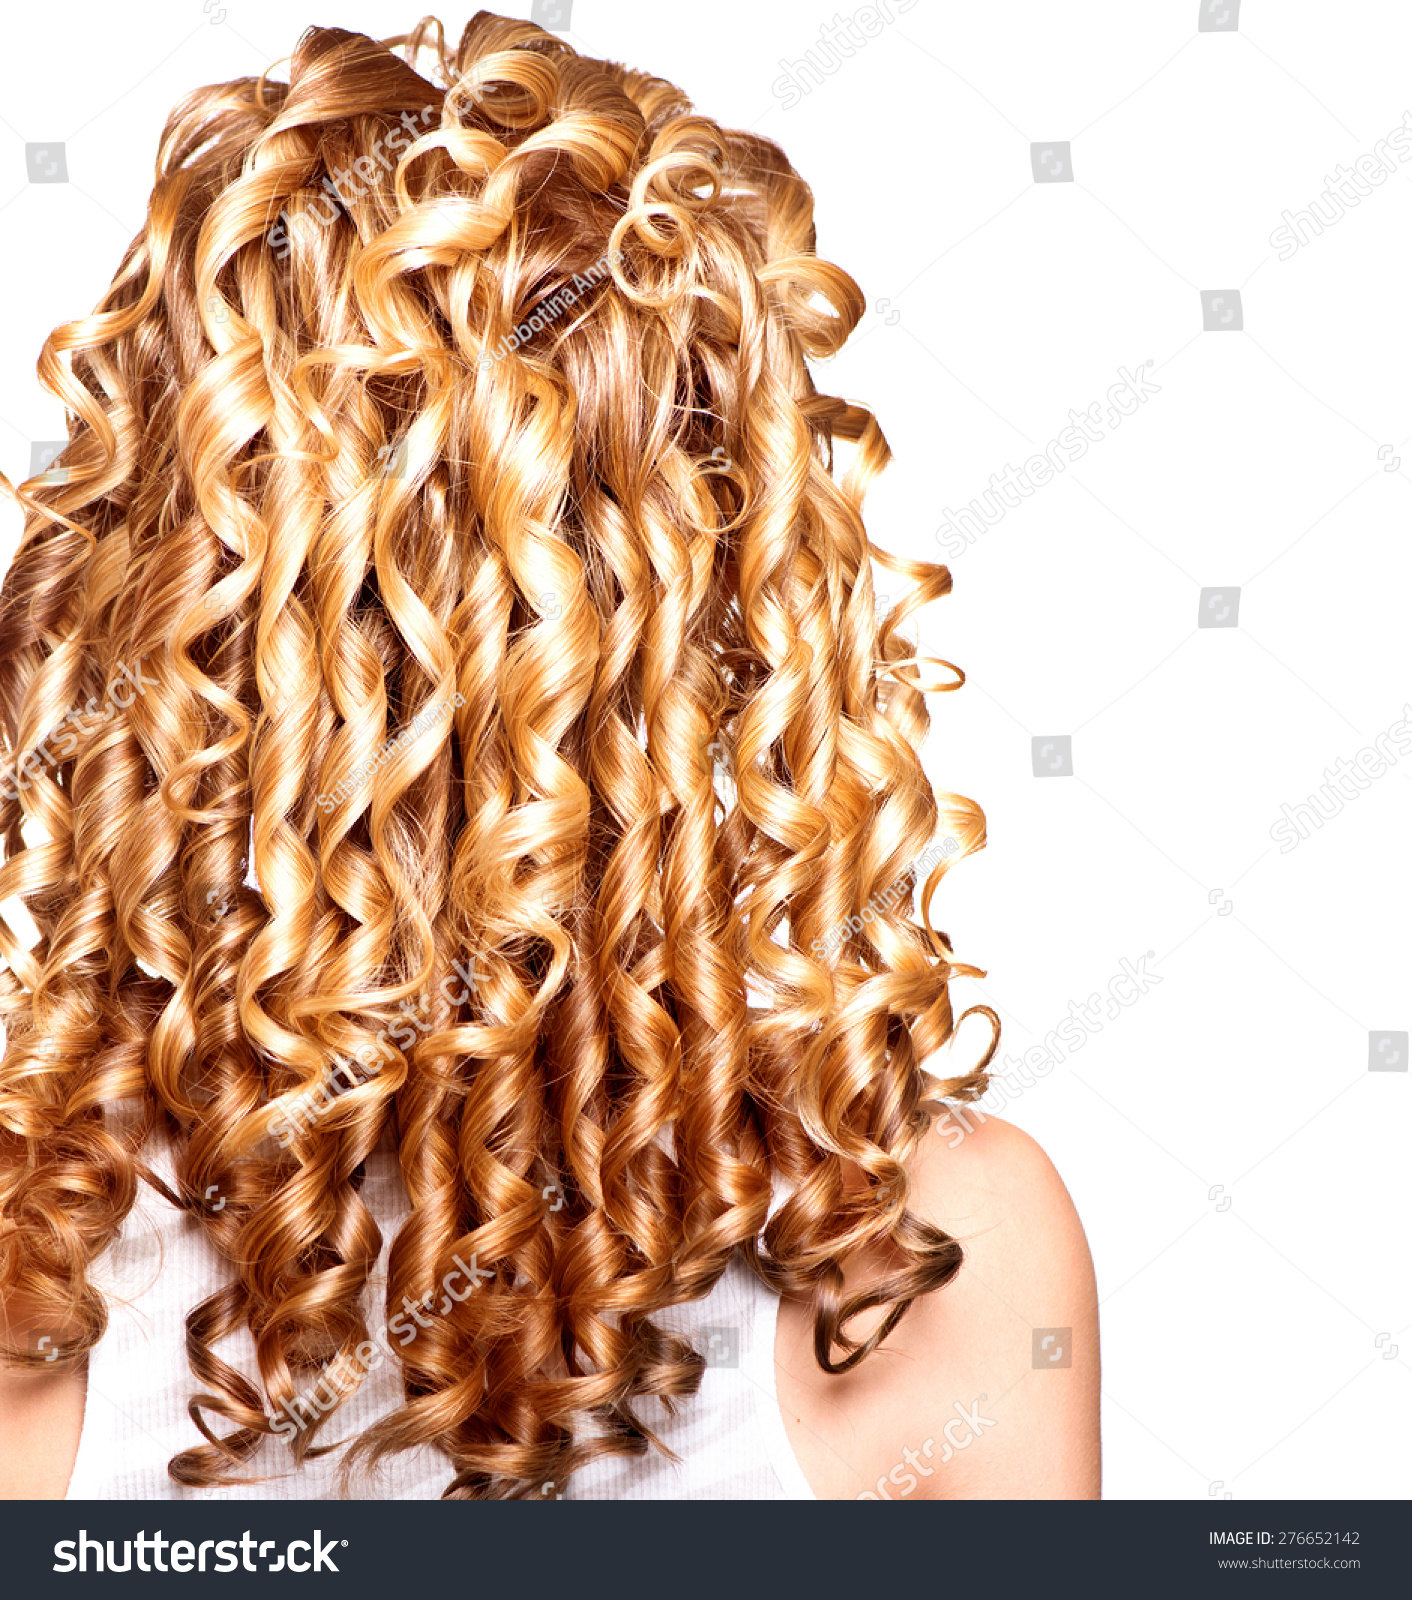 Beauty Girl With Blonde Curly Hair Healthy And Long Blond Wavy Hair Long Permed Hair 